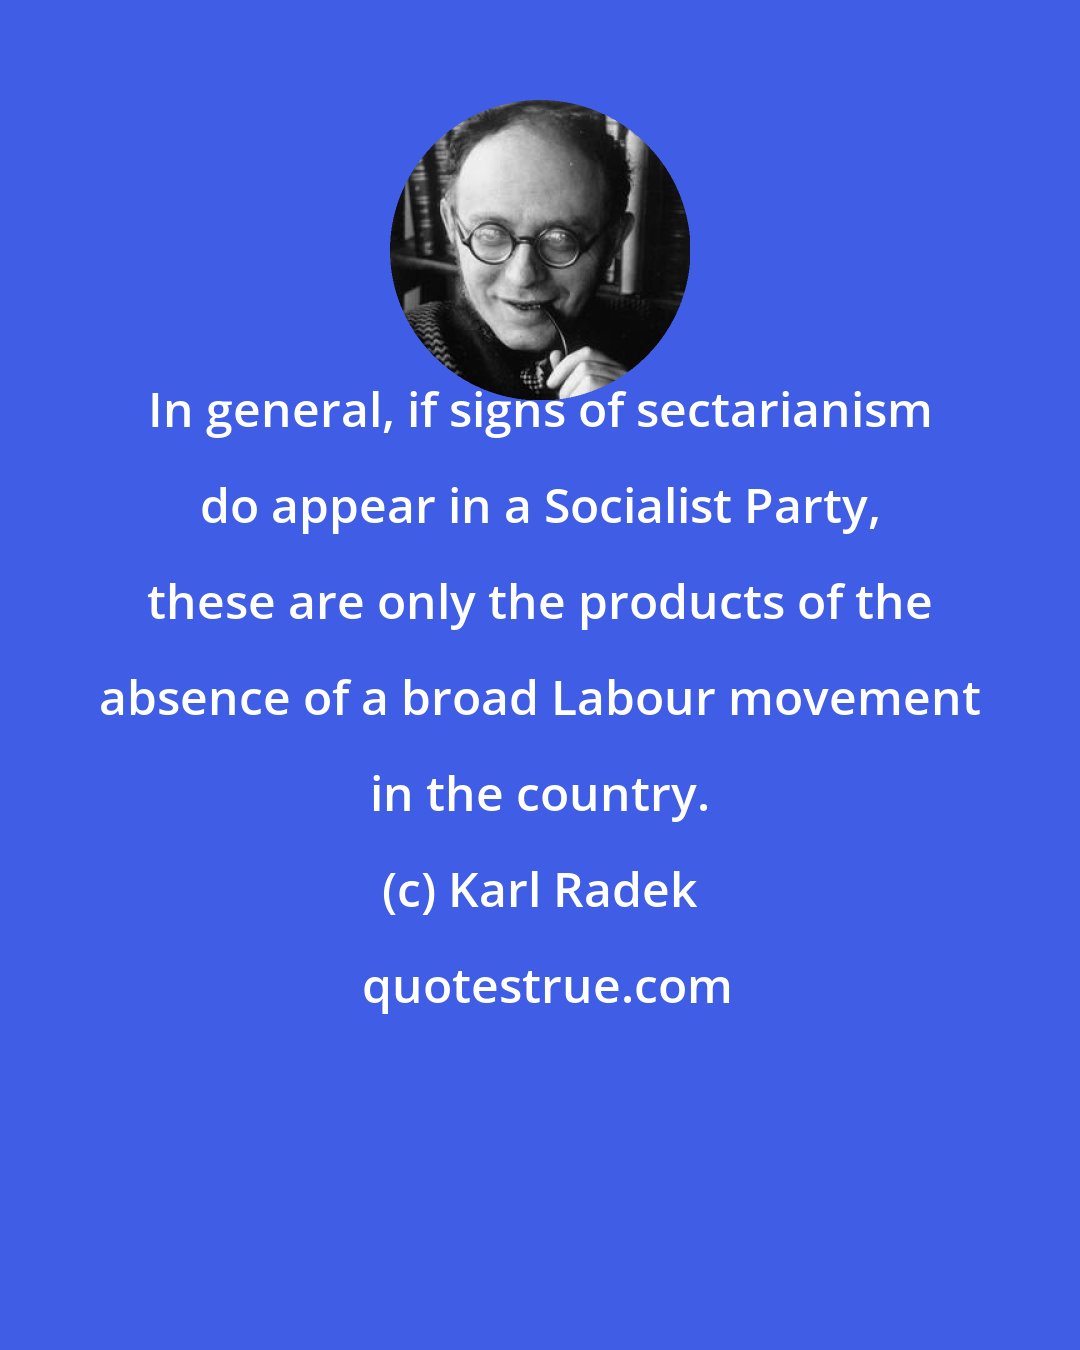 Karl Radek: In general, if signs of sectarianism do appear in a Socialist Party, these are only the products of the absence of a broad Labour movement in the country.